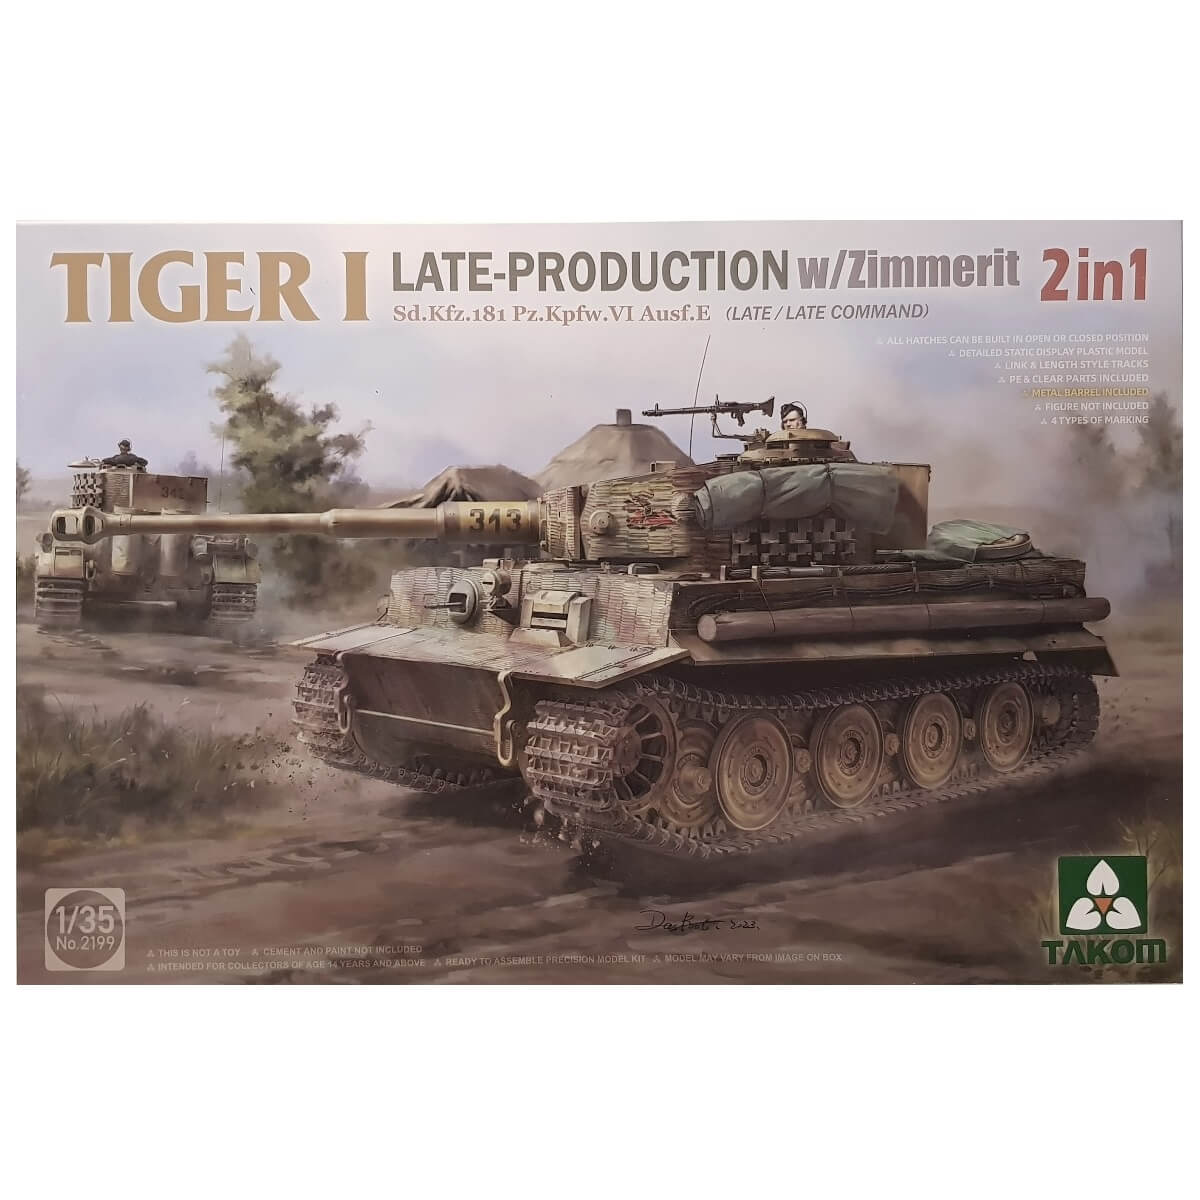 1:35 Tiger I Late Production with Zimmerit Sd.Kfz. 181 Pz.Kpfw. VI Ausf. E - Late/Late Command - TAKOM